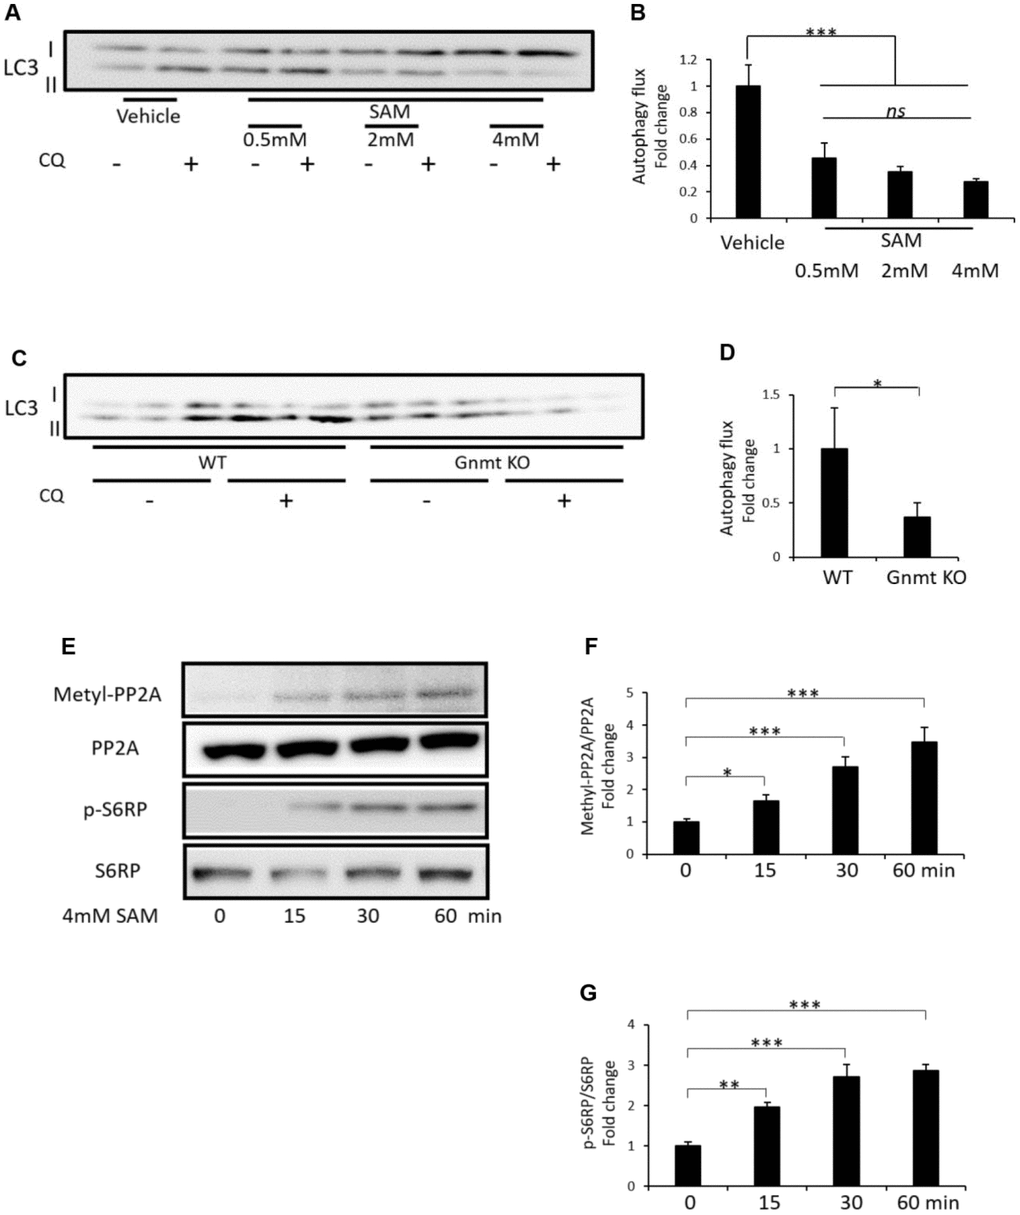 Effect of SAM on amino acid-free-induced autophagy and methyl-PP2A and p-S6RP expression in cultured HK-2 cells and change of starvation-induced autophagy in the renal cortex of Gnmt knockout (KO) mice. Representative western blots of LC3 in HK-2 cells (A). Quantitative autophagic flux in cultured HK-2 cells (B) (n=3). Representative western blots of LC3 in the renal cortex of Gnmt KO mice after 48 hours of starvation (C). Quantitative autophagic flux in the renal cortex of mice (D) (n=3). Representative western blots of methyl-PP2A, PP2A, p-S6RP and S6RP in HK-2 cells (E). Quantitative expression of methyl-PP2A to PP2A (F) and p-S6RP to S6RP (G) in HK-2 cells (n=3). The data shown are the means ± SD. *pns: not significant. SAM: S-adenosylmethionine, Gnmt: glycine-N-methyltransferase, CQ: chloroquine, LC3: Microtubule-associated protein 1 light chain 3, WT: wild type, Gnmt: glycine N-methyltransferase, SAM: S-adenosylmethionine, Methyl-PP2A: methylated protein phosphatase 2A, PP2A: protein phosphatase 2A, p-S6RP: phospho-S6 ribosomal protein, S6RP: S6 ribosomal protein.